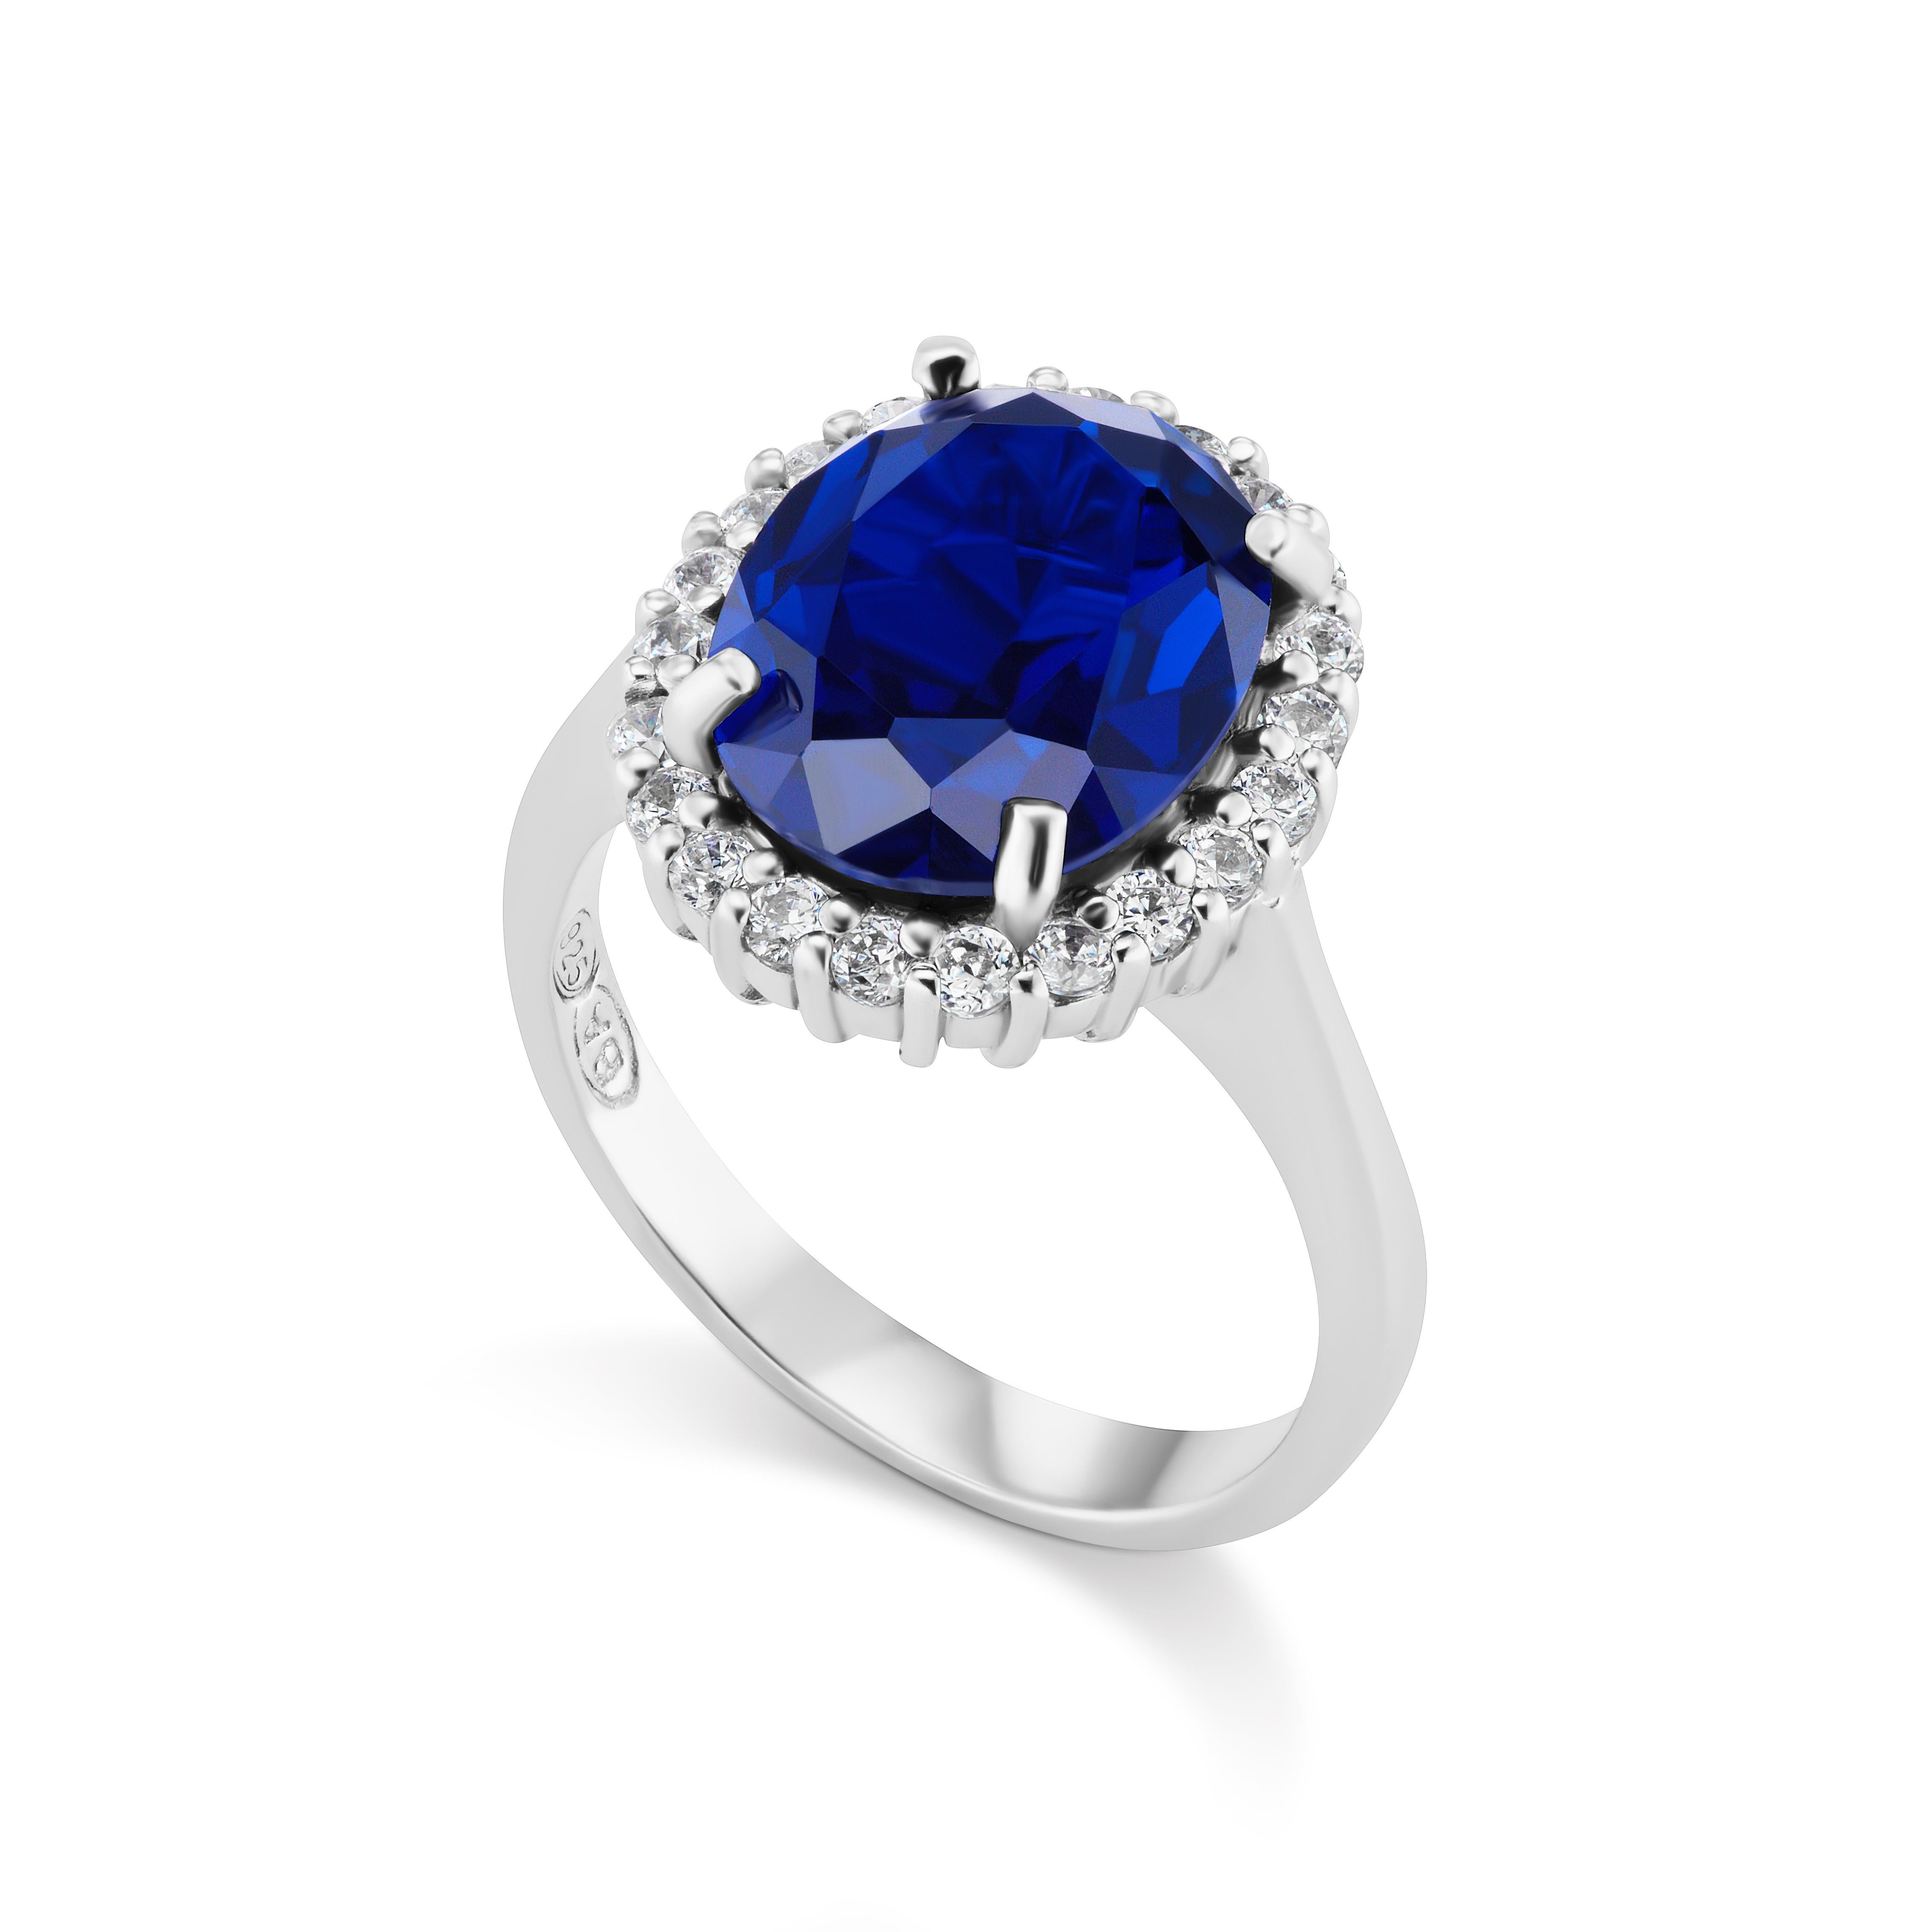 Magnificent Costume Jewelry Mini Princess Diana Man-Made 4 Carat Oval Wonderful Color Sapphire Cubic Zirconia Diamond Sterling Ring measures 1/2 inch diameter, free sizing
